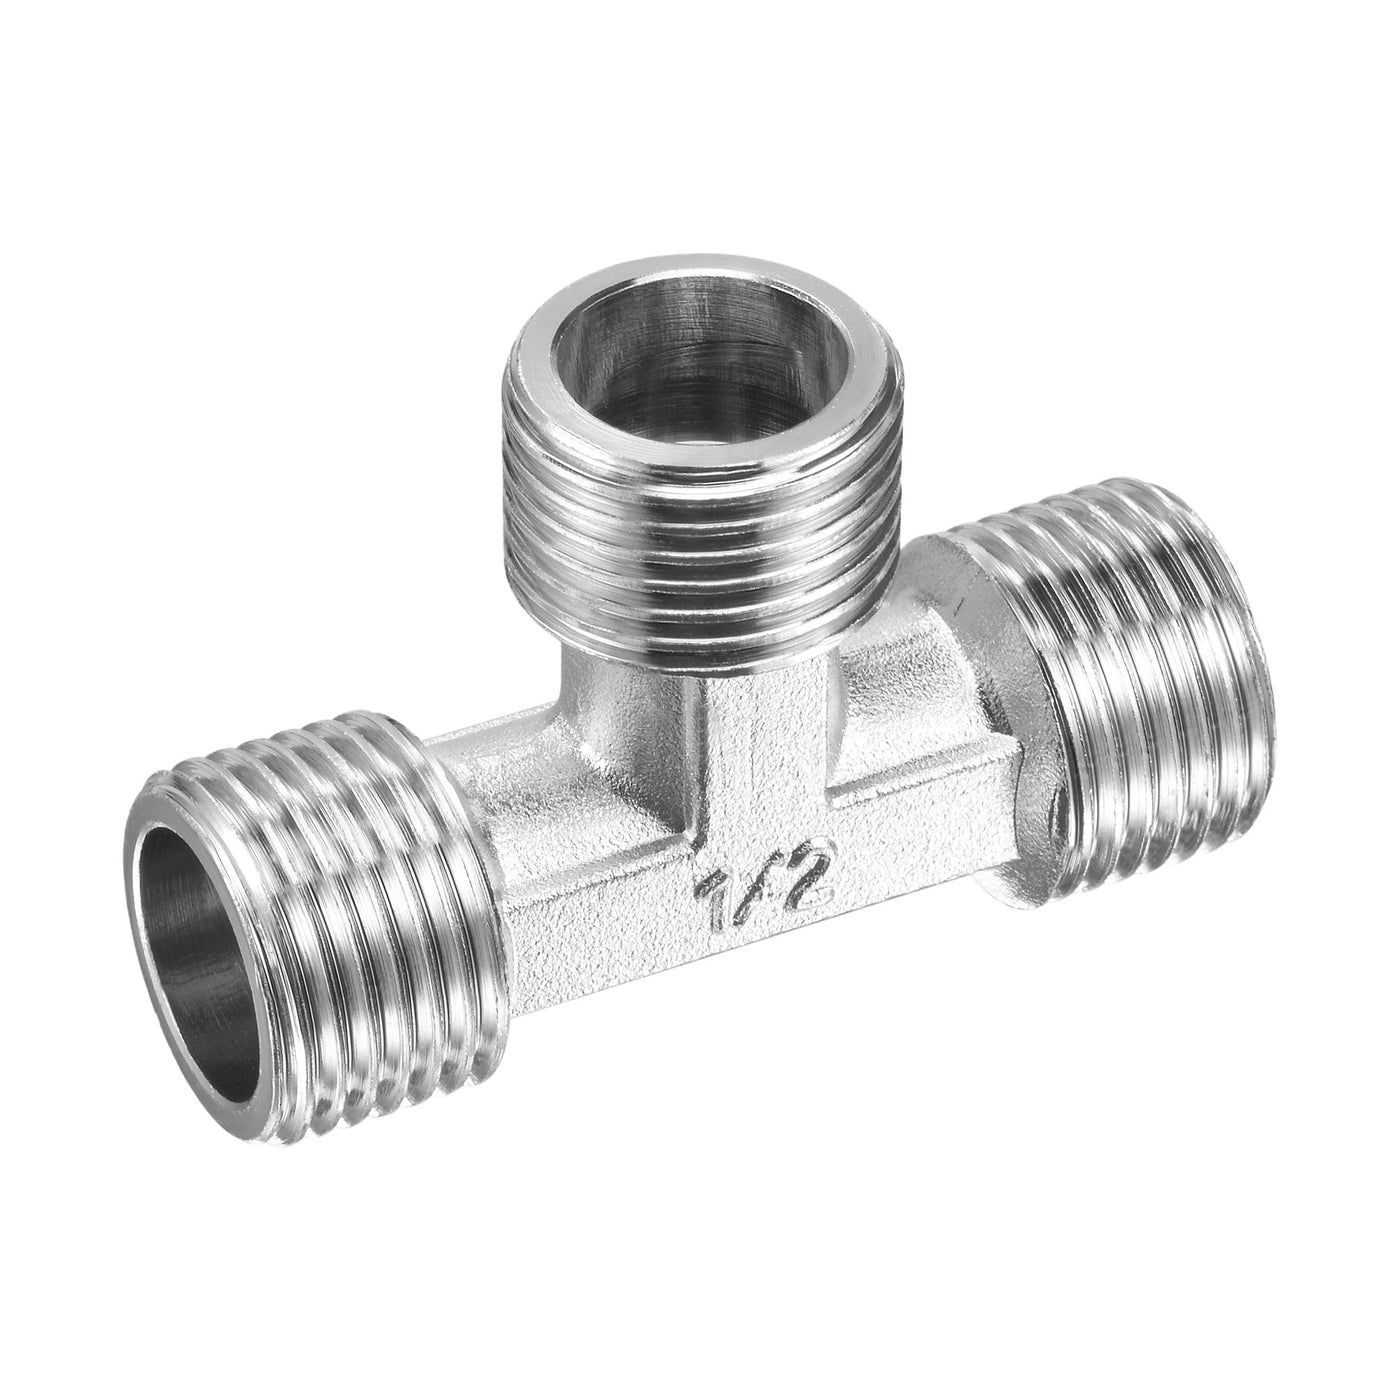 uxcell Uxcell Pipe Fitting Tee G1/2 Male Thread 3 Way T Shape Hose Connector Adapter, Nickel-Plated Copper